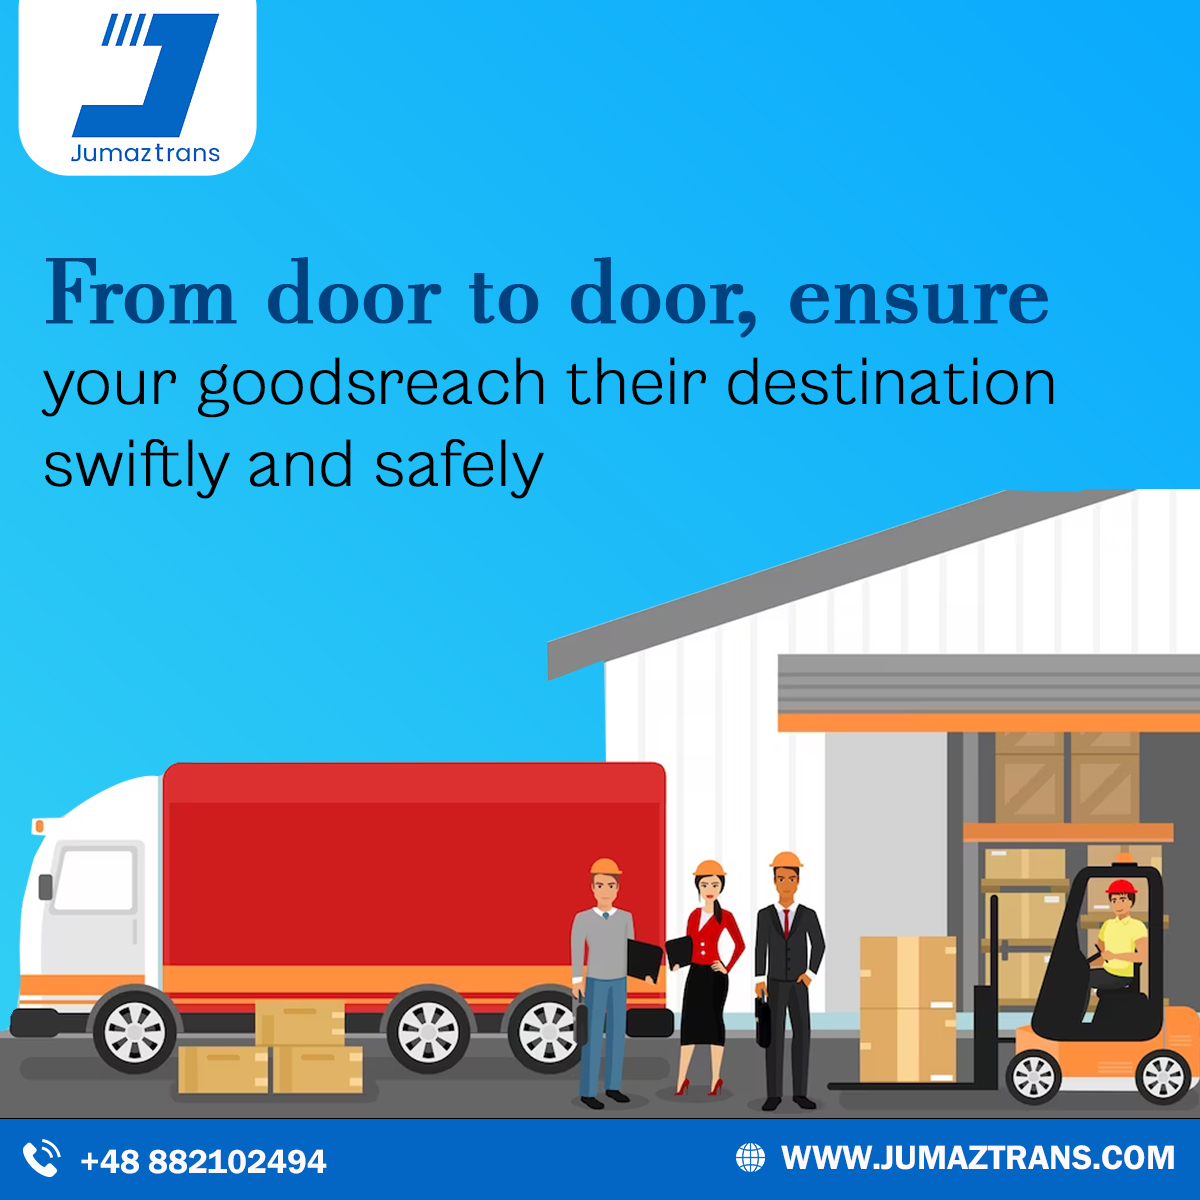 From door to door, ensure your goodsreach their destination swiftly and safely
.
#shipping #logistics #freeshipping #worldwideshipping #shippingworldwide #dropshipping #shippingavailable #logisticscompany #shippingalloverindia #logisticsmanagement #fastshipping